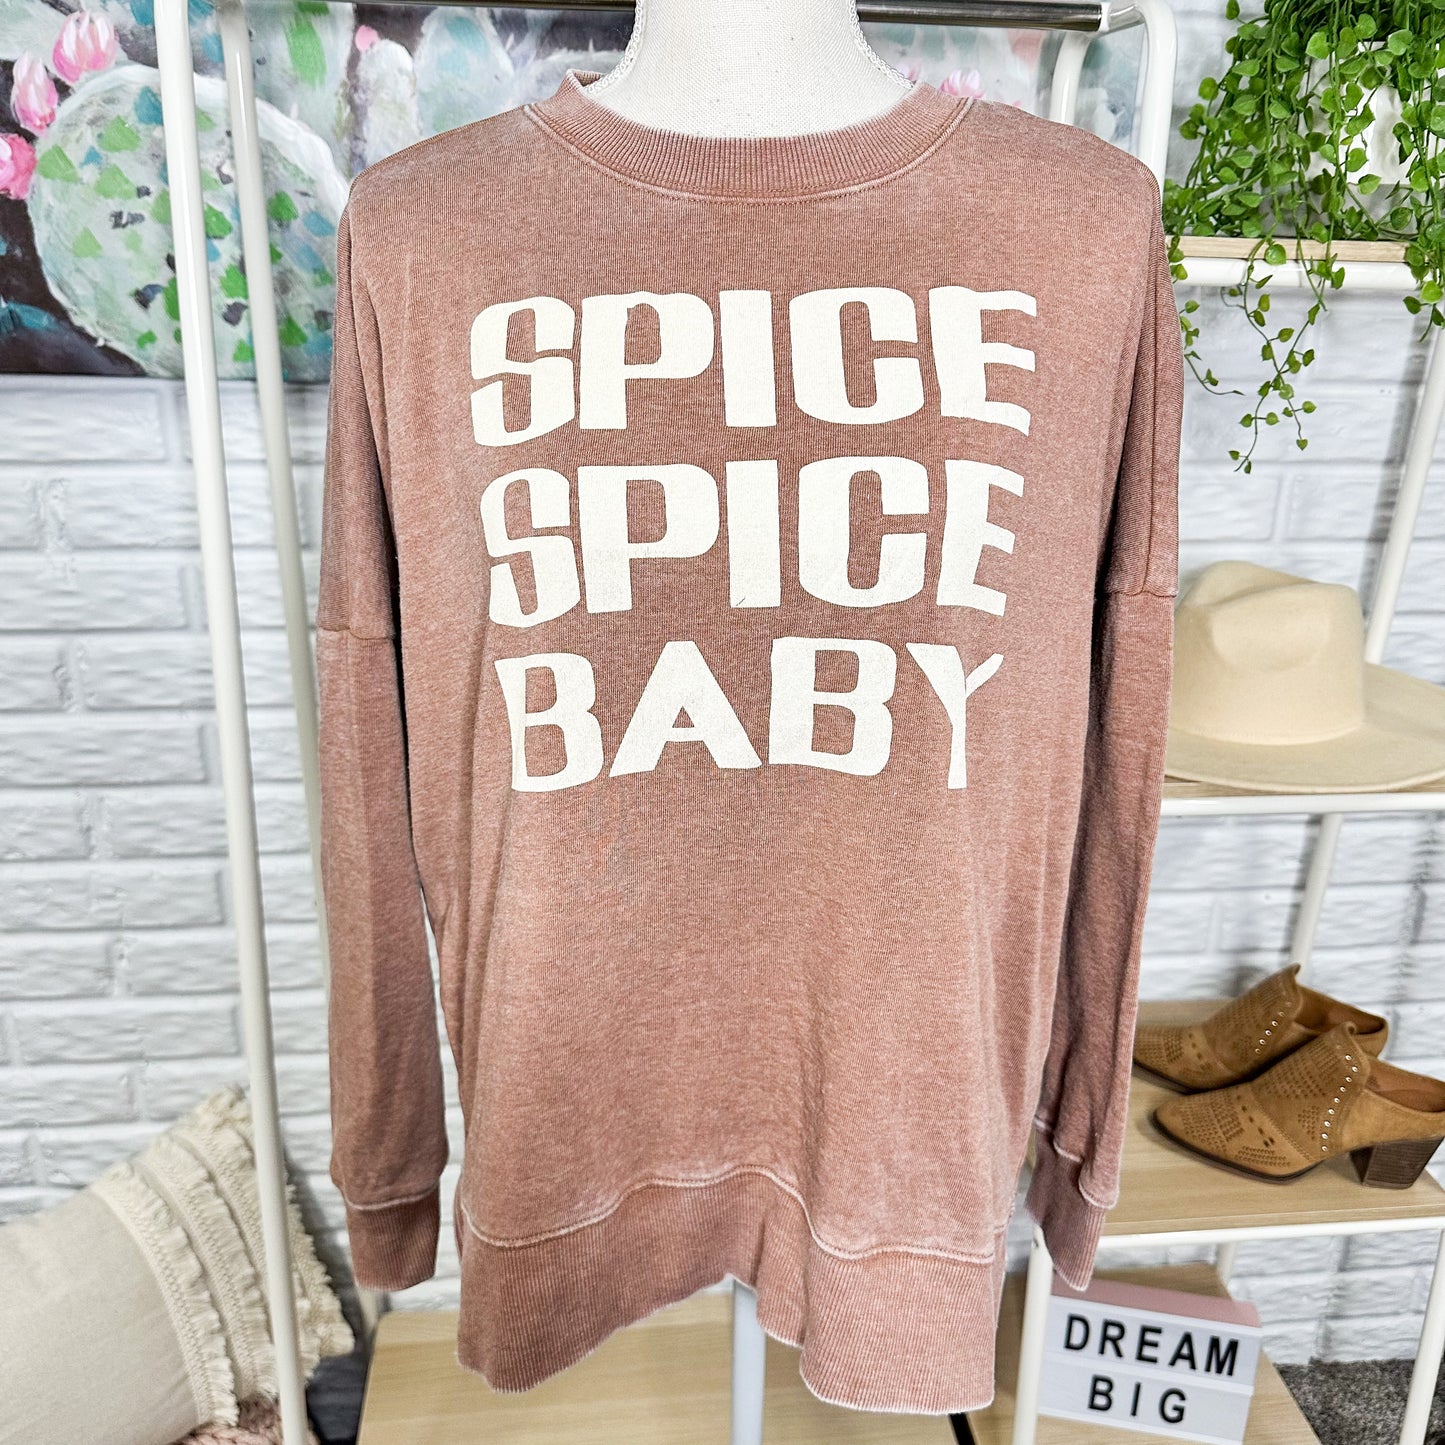 Pink Lily Spice Spice Baby Rust Graphic Sweatshirt Size XL